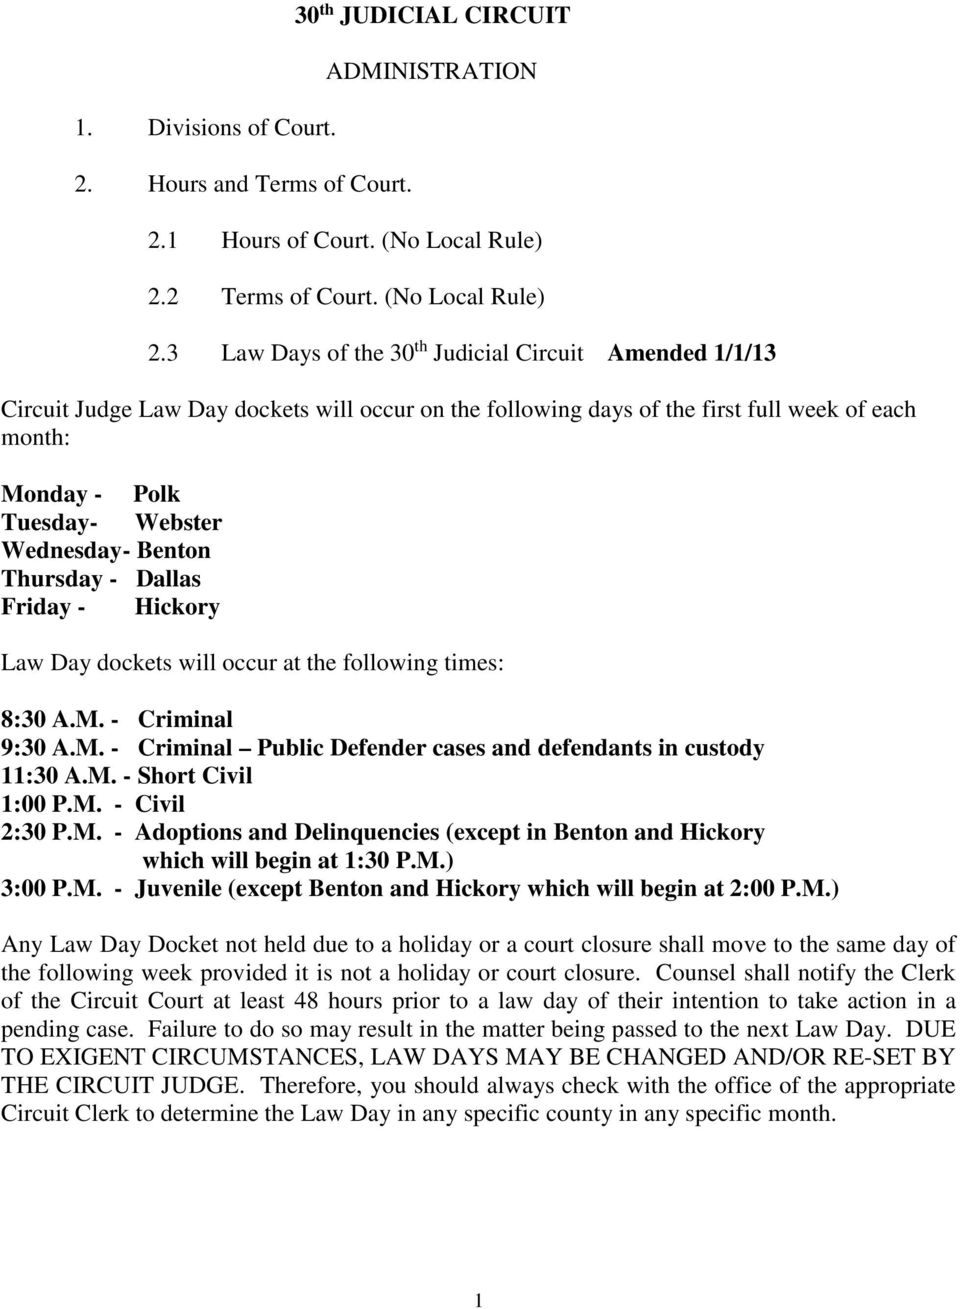 3 Law Days of the 30 th Judicial Circuit Amended 1/1/13 Circuit Judge Law Day dockets will occur on the following days of the first full week of each month: Monday - Polk Tuesday- Webster Wednesday-